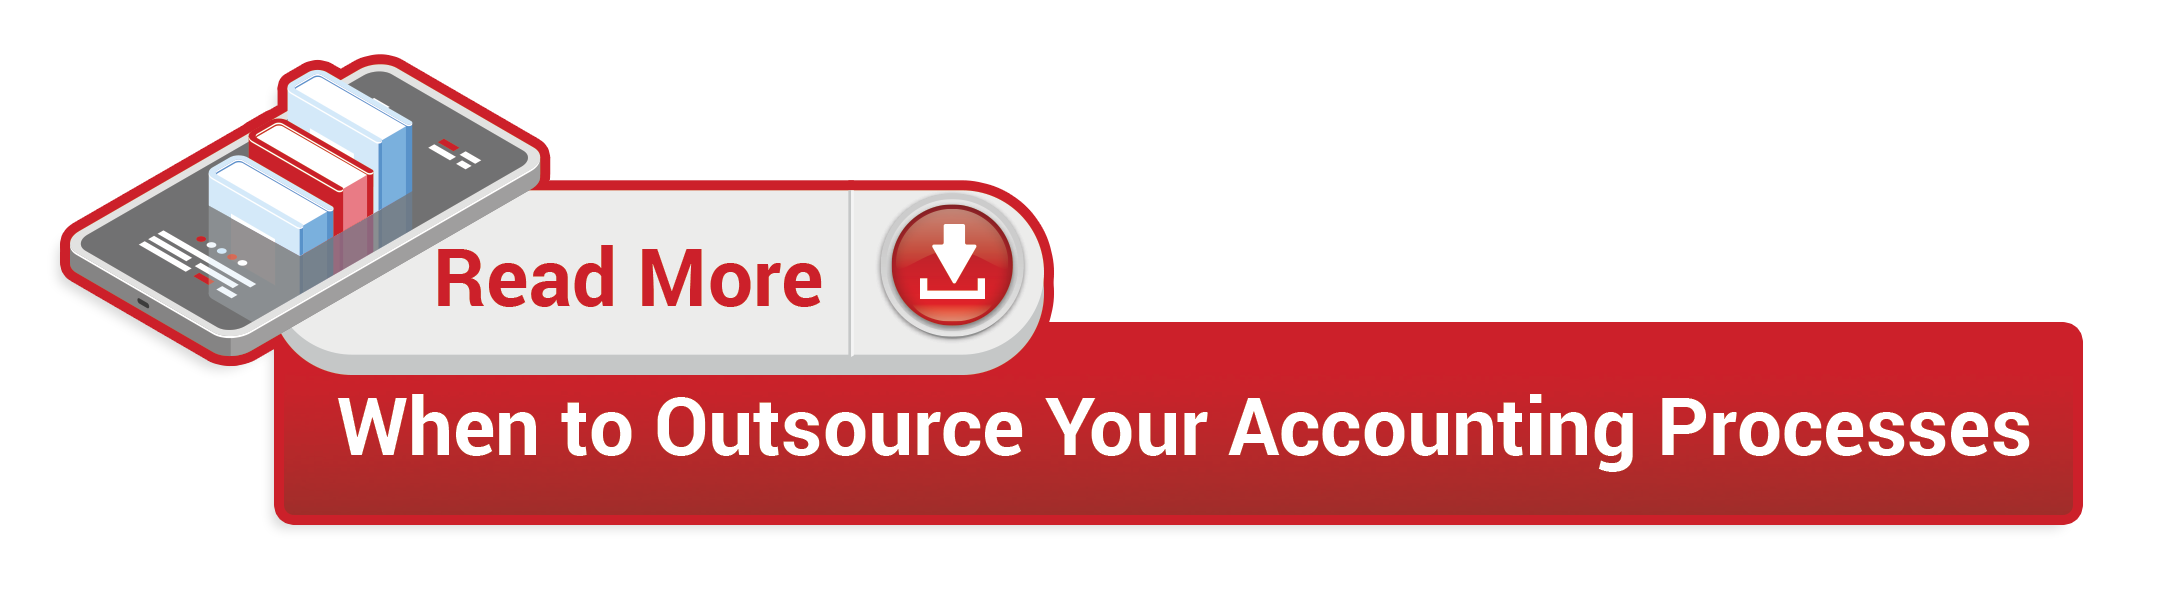 Infinit-O Outsource Accounting Blog